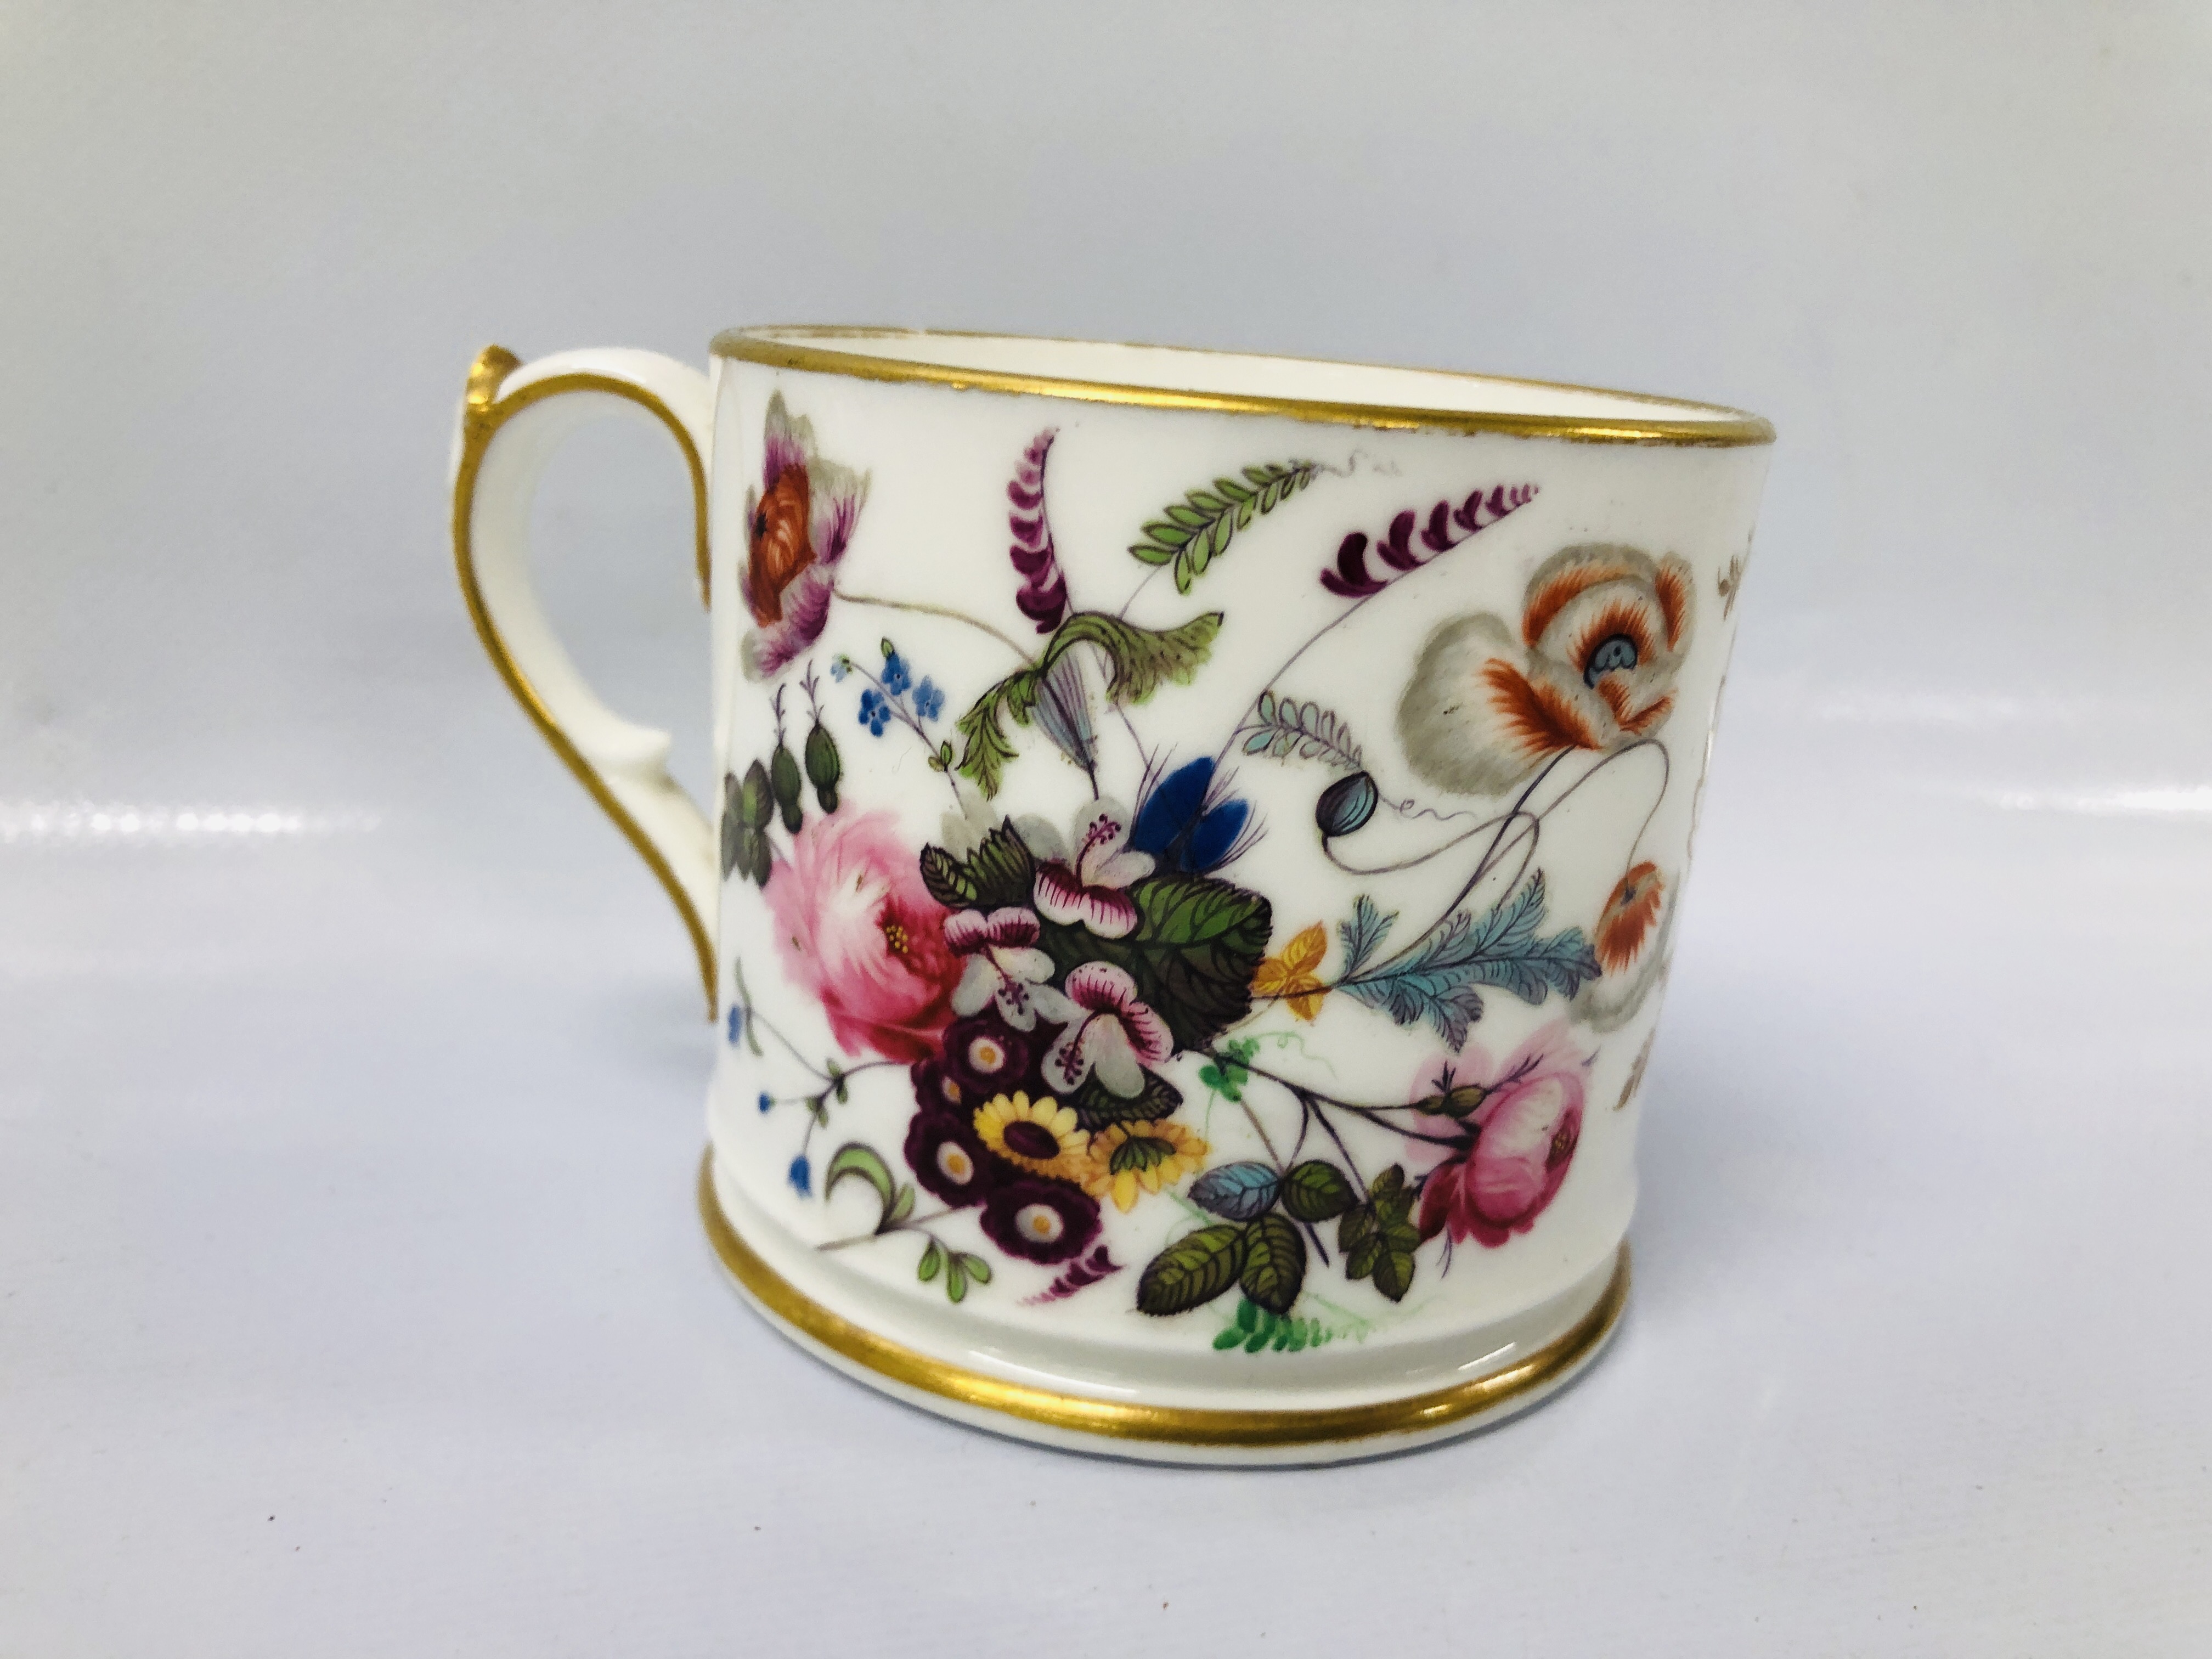 VINTAGE "DAVENPORT" MUG HANDPAINTED WITH FLOEWRS AND LAKE SCENE ALONG WITH A CREAM WARE CHRISTENING - Image 2 of 9